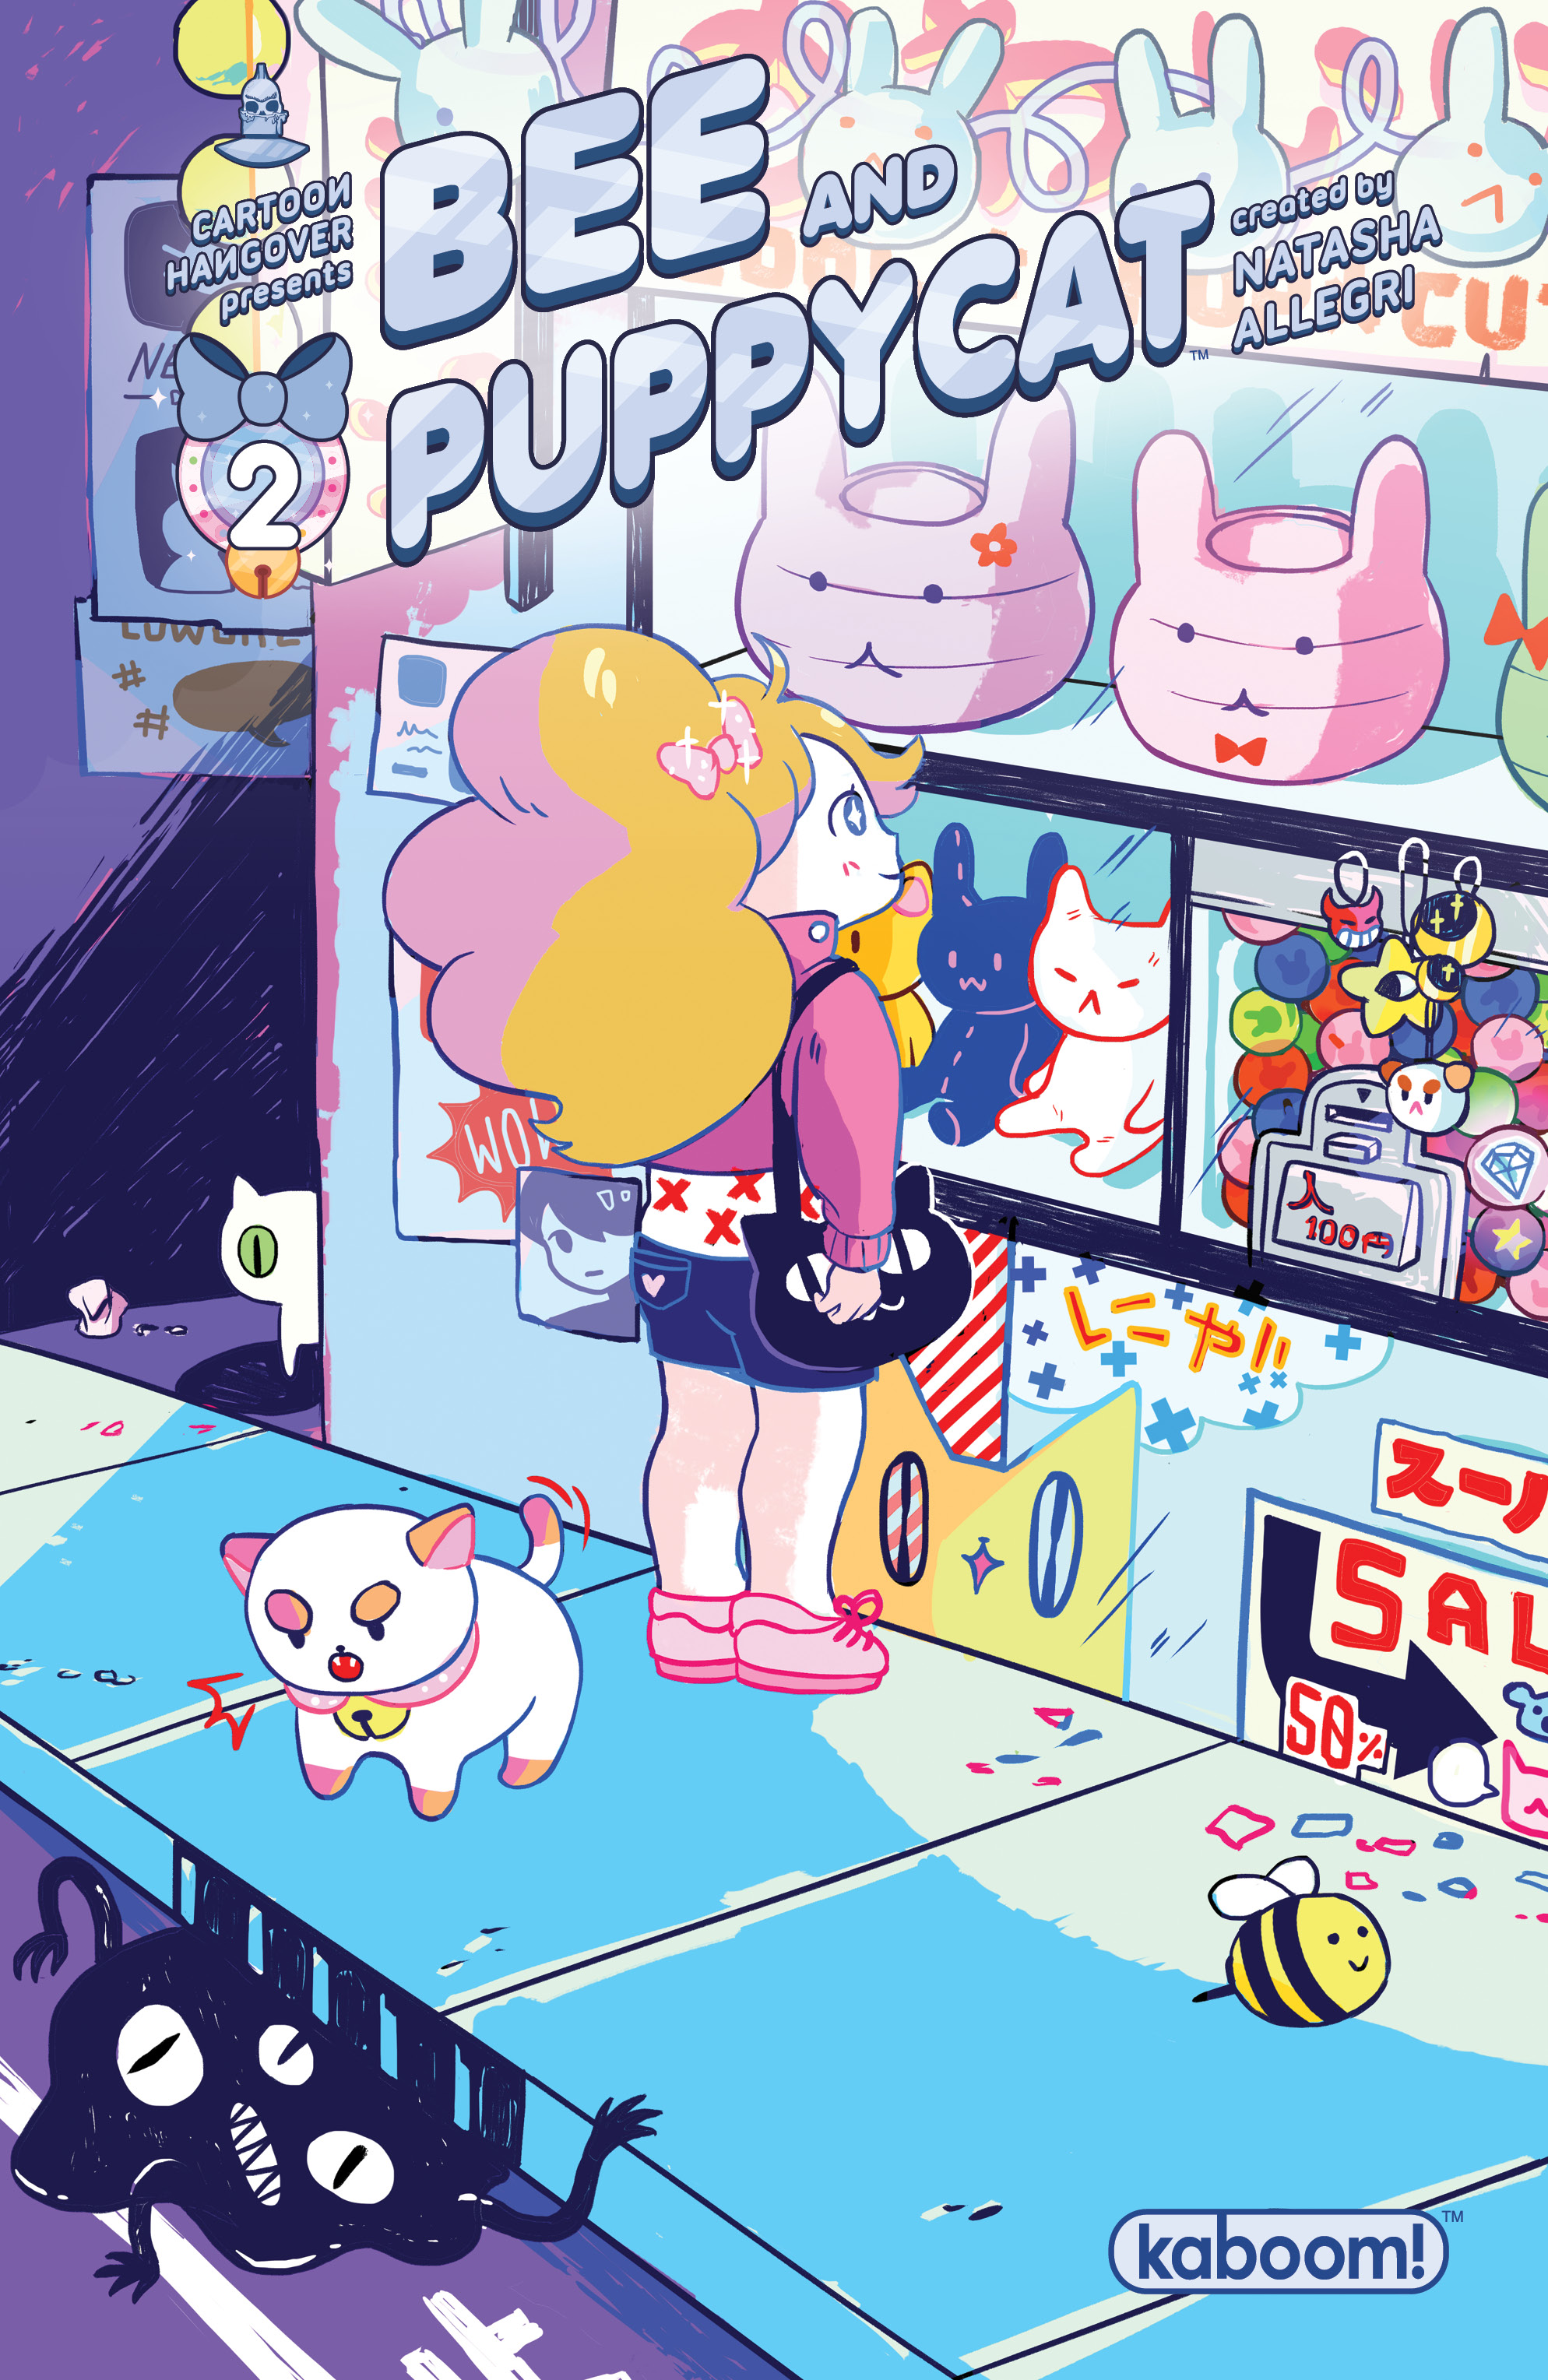 Geek insider, geekinsider, geekinsider. Com,, best comic i read: 'bee and puppycat' vol 1, entertainment